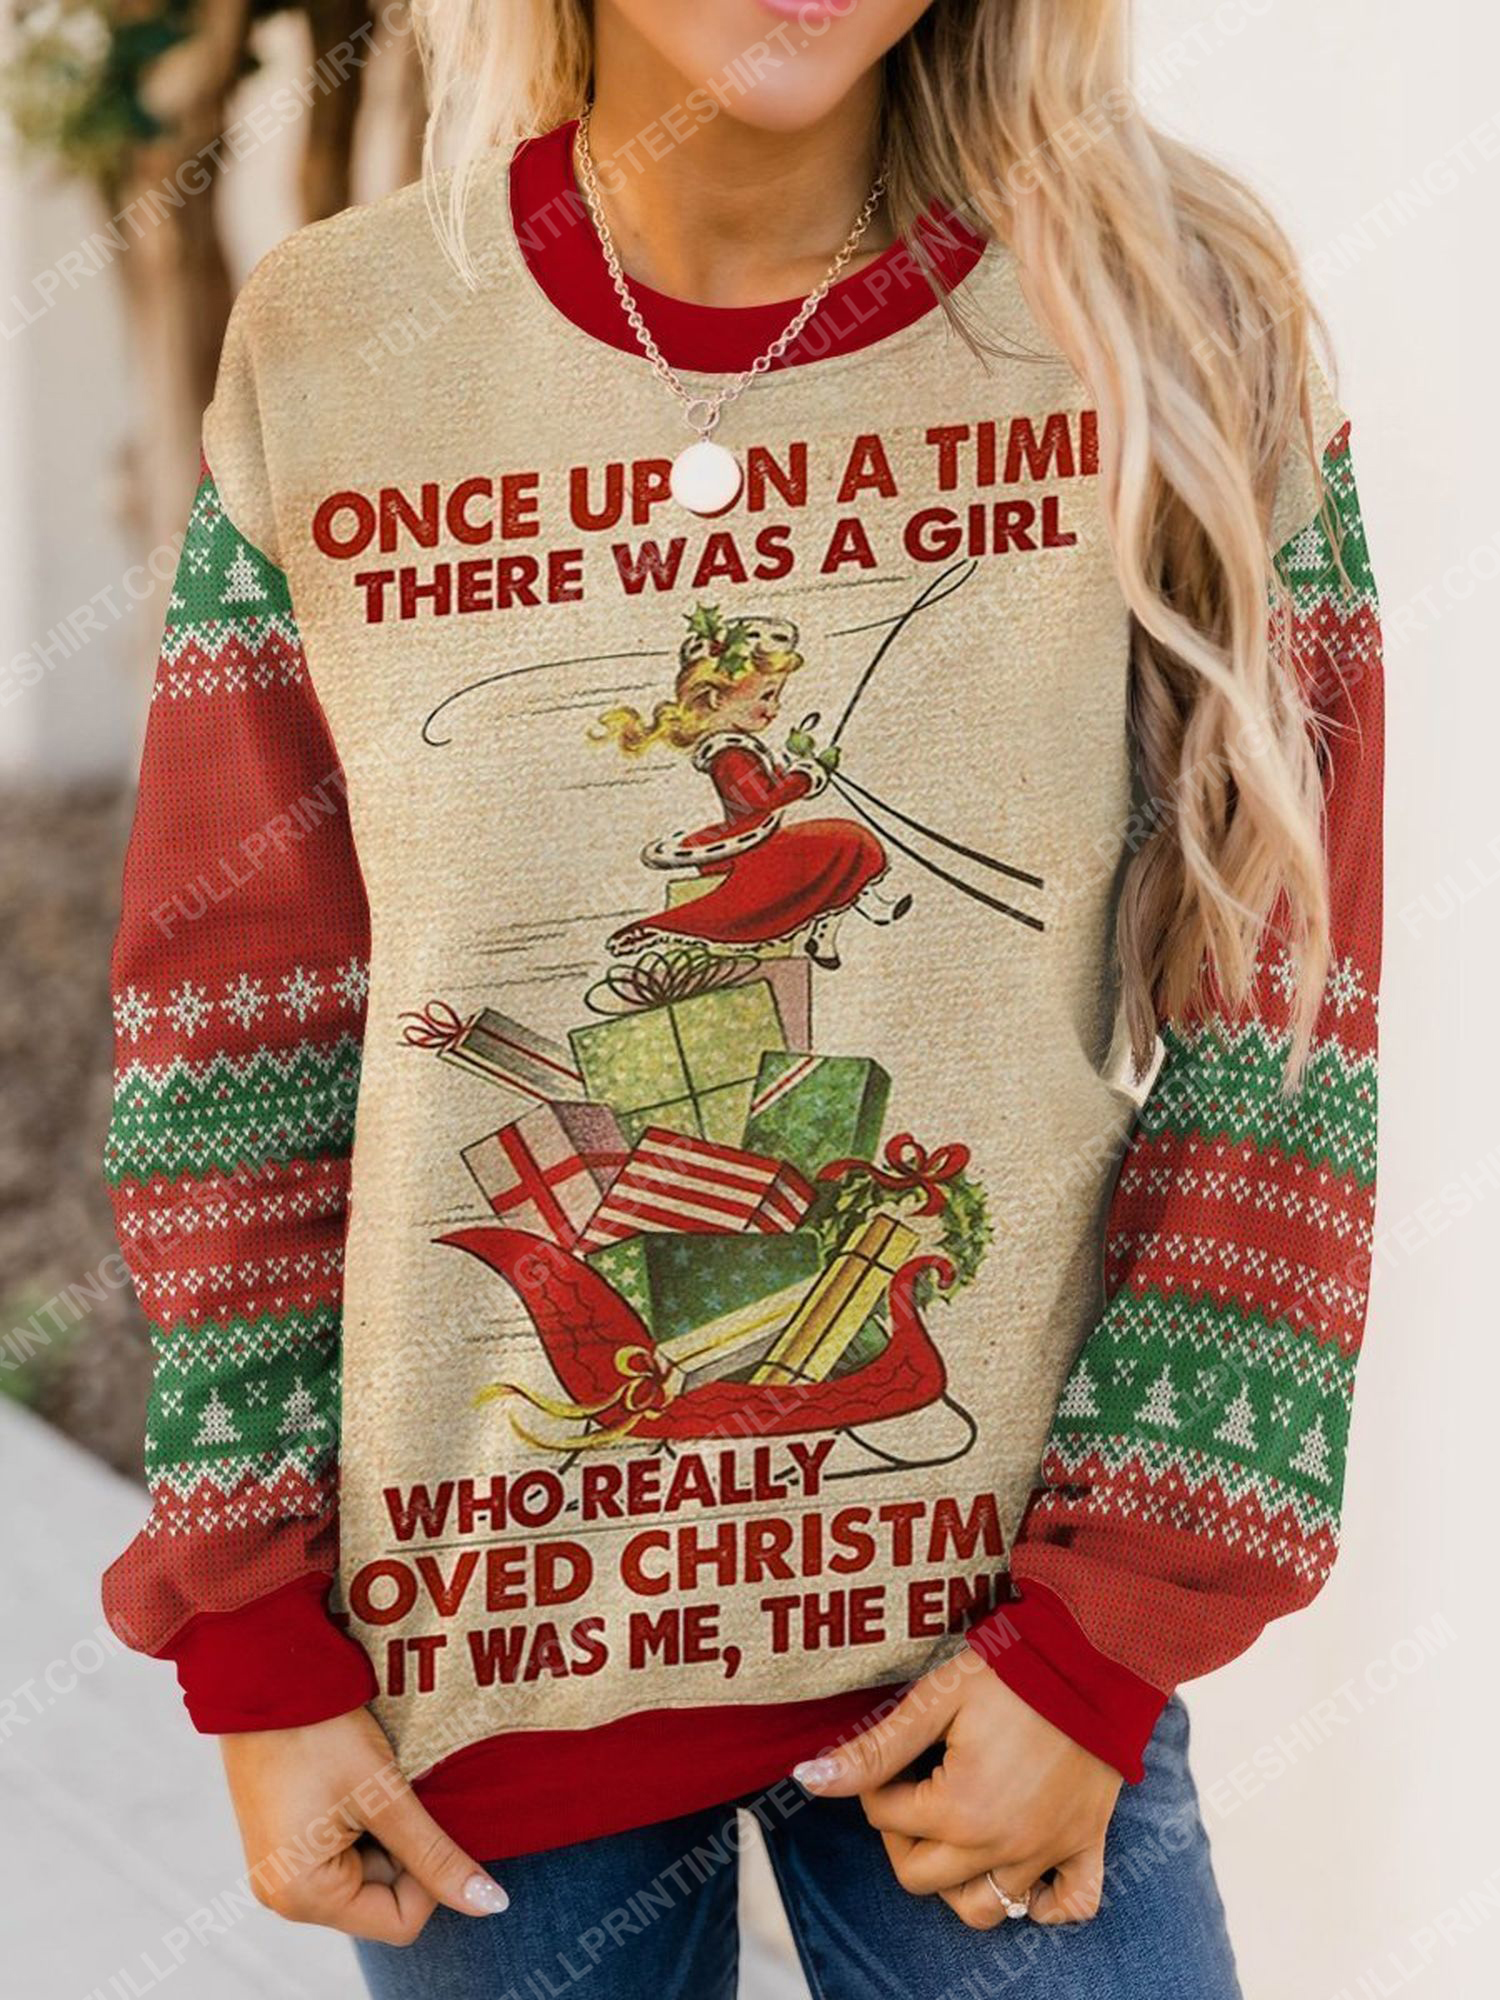 Once upon a time there was a girl who really loved christmas shirt